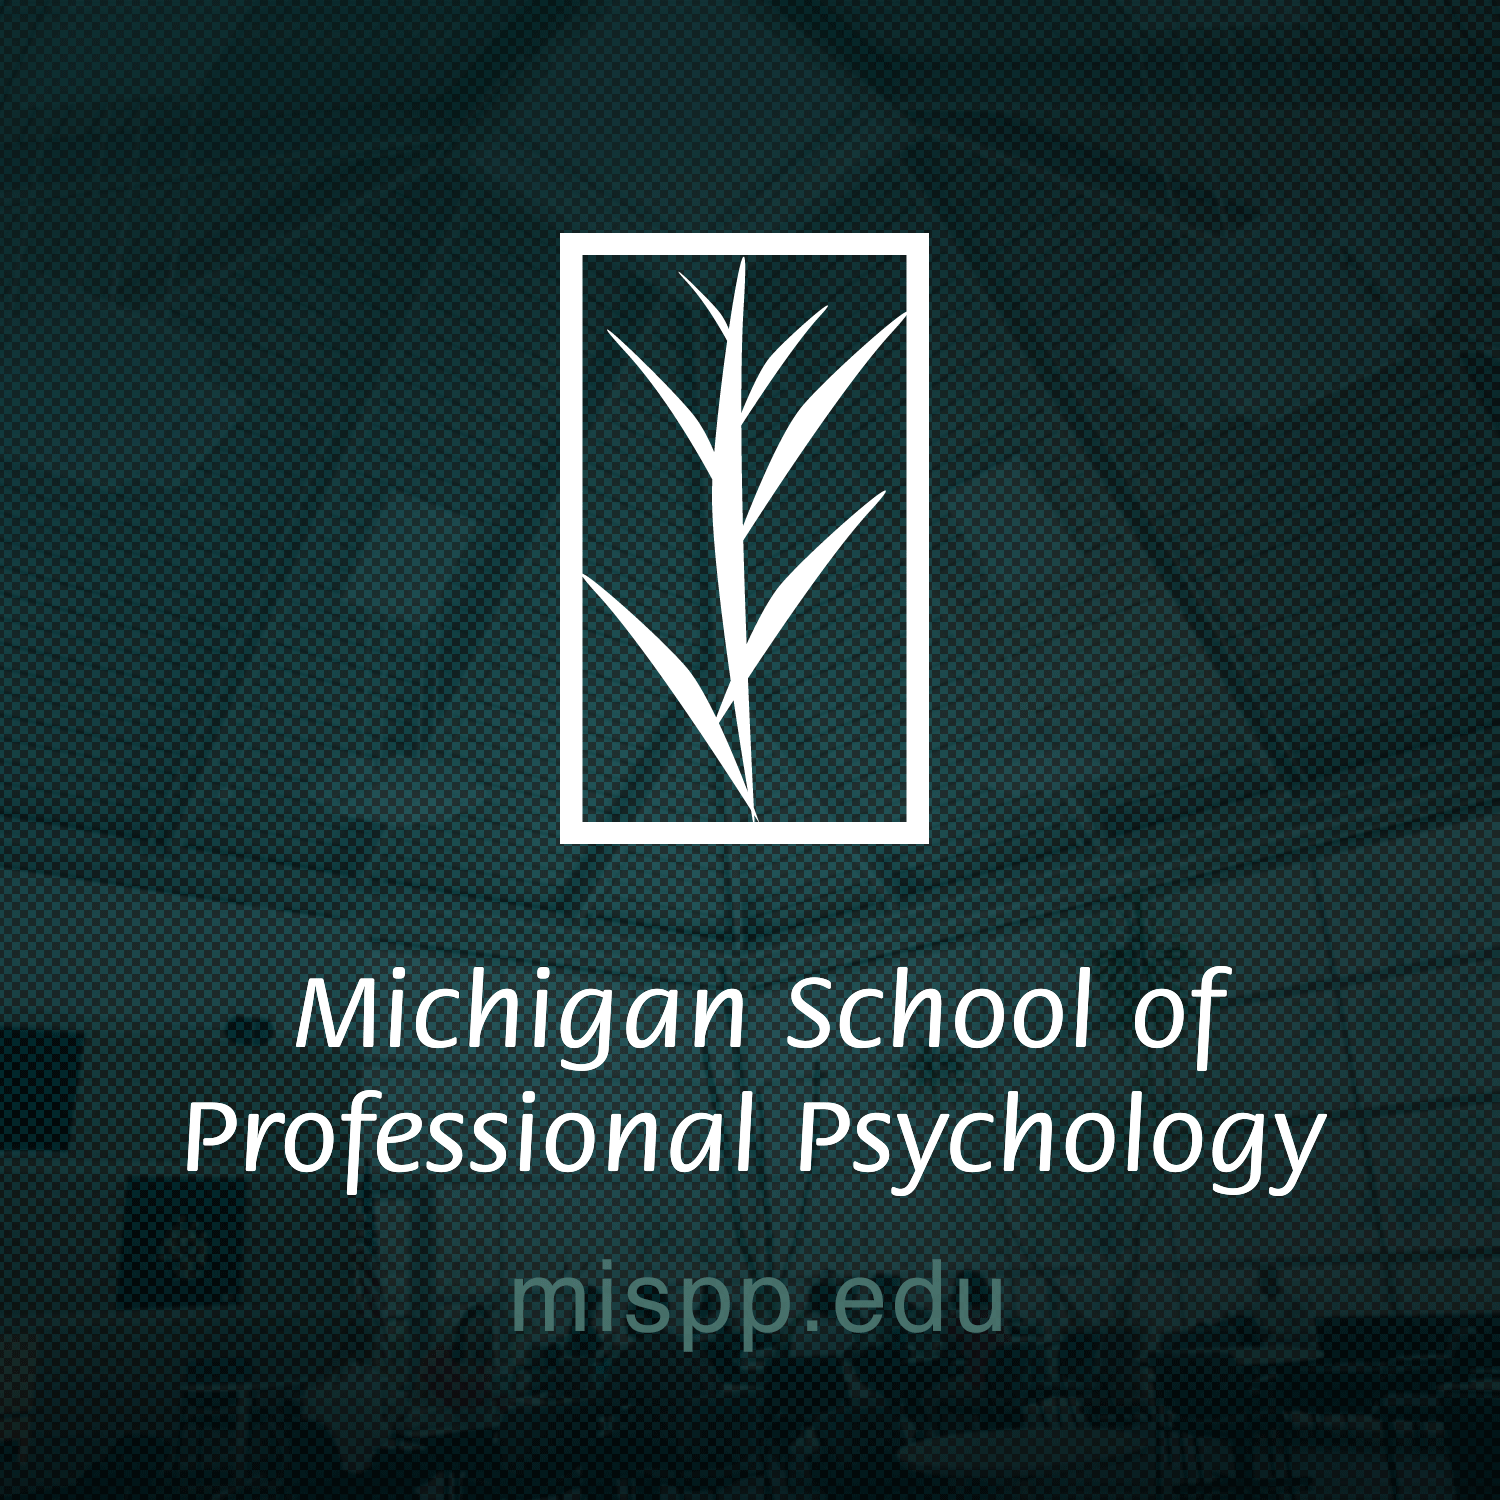 Michigan School Of Professional Psychology - The Michigan School of Professional Psychology (MiSPP) - MiSPP ... - The Michigan School of Professional Psychology (MiSPP) provides masters and   doctoral (PsyD) clinical psychology programs to graduate students.